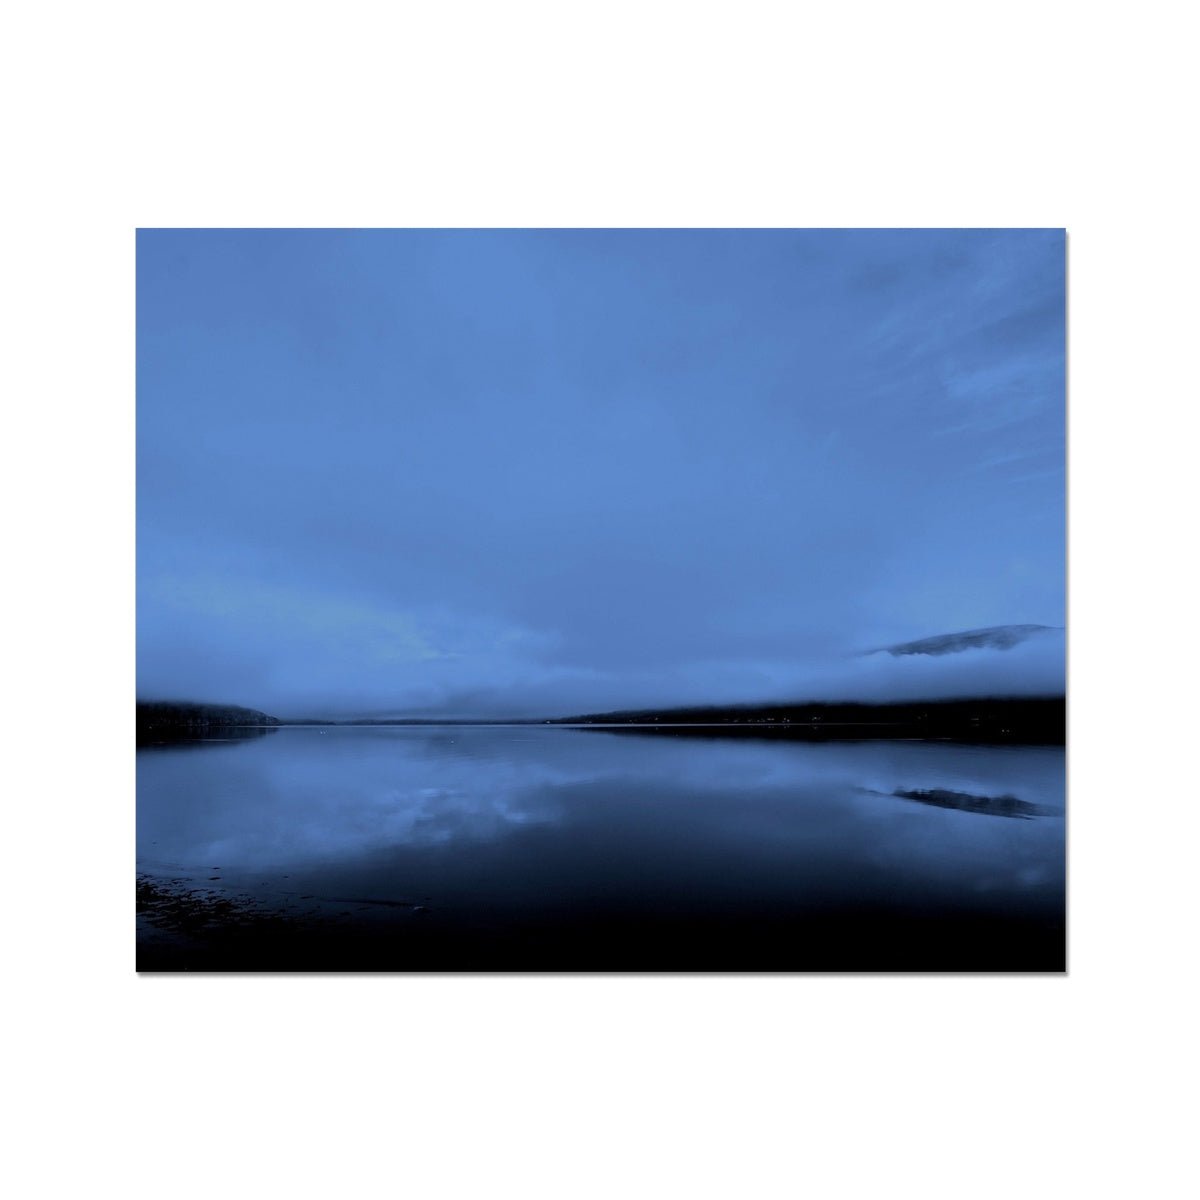 The Blue Hour Loch Fyne Painting | Artist Proof Collector Prints From Scotland-Artist Proof Collector Prints-Scottish Lochs & Mountains Art Gallery-20"x16"-Paintings, Prints, Homeware, Art Gifts From Scotland By Scottish Artist Kevin Hunter